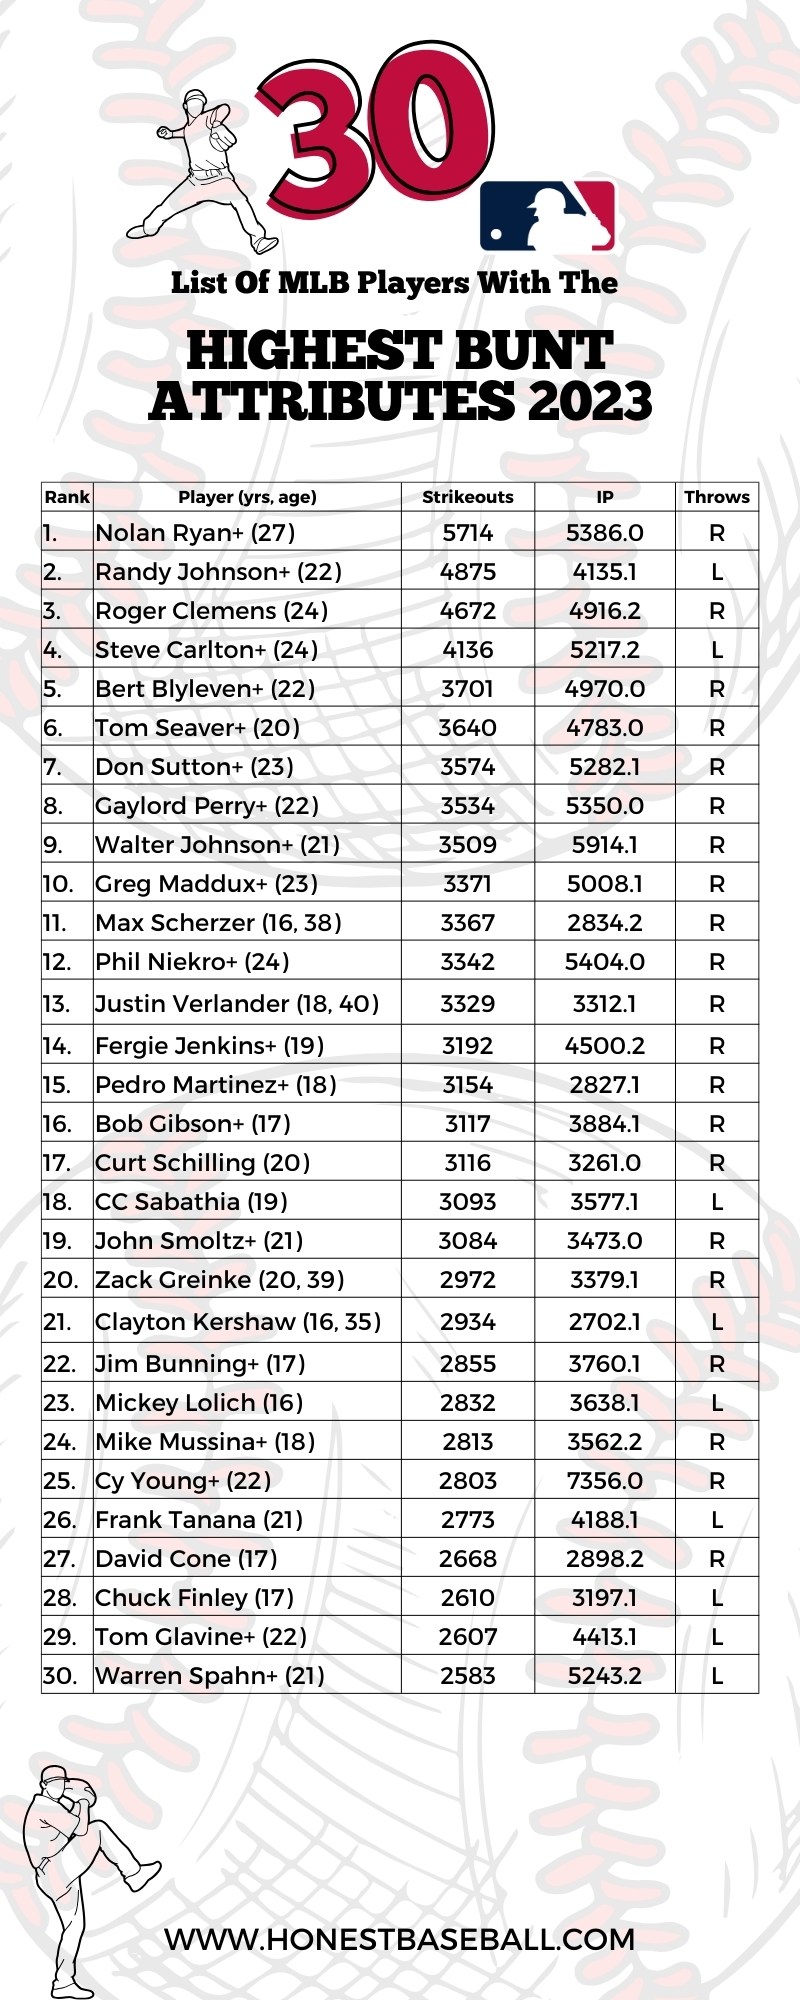 List of top 30 career leaders _ records for strikeouts in MLB